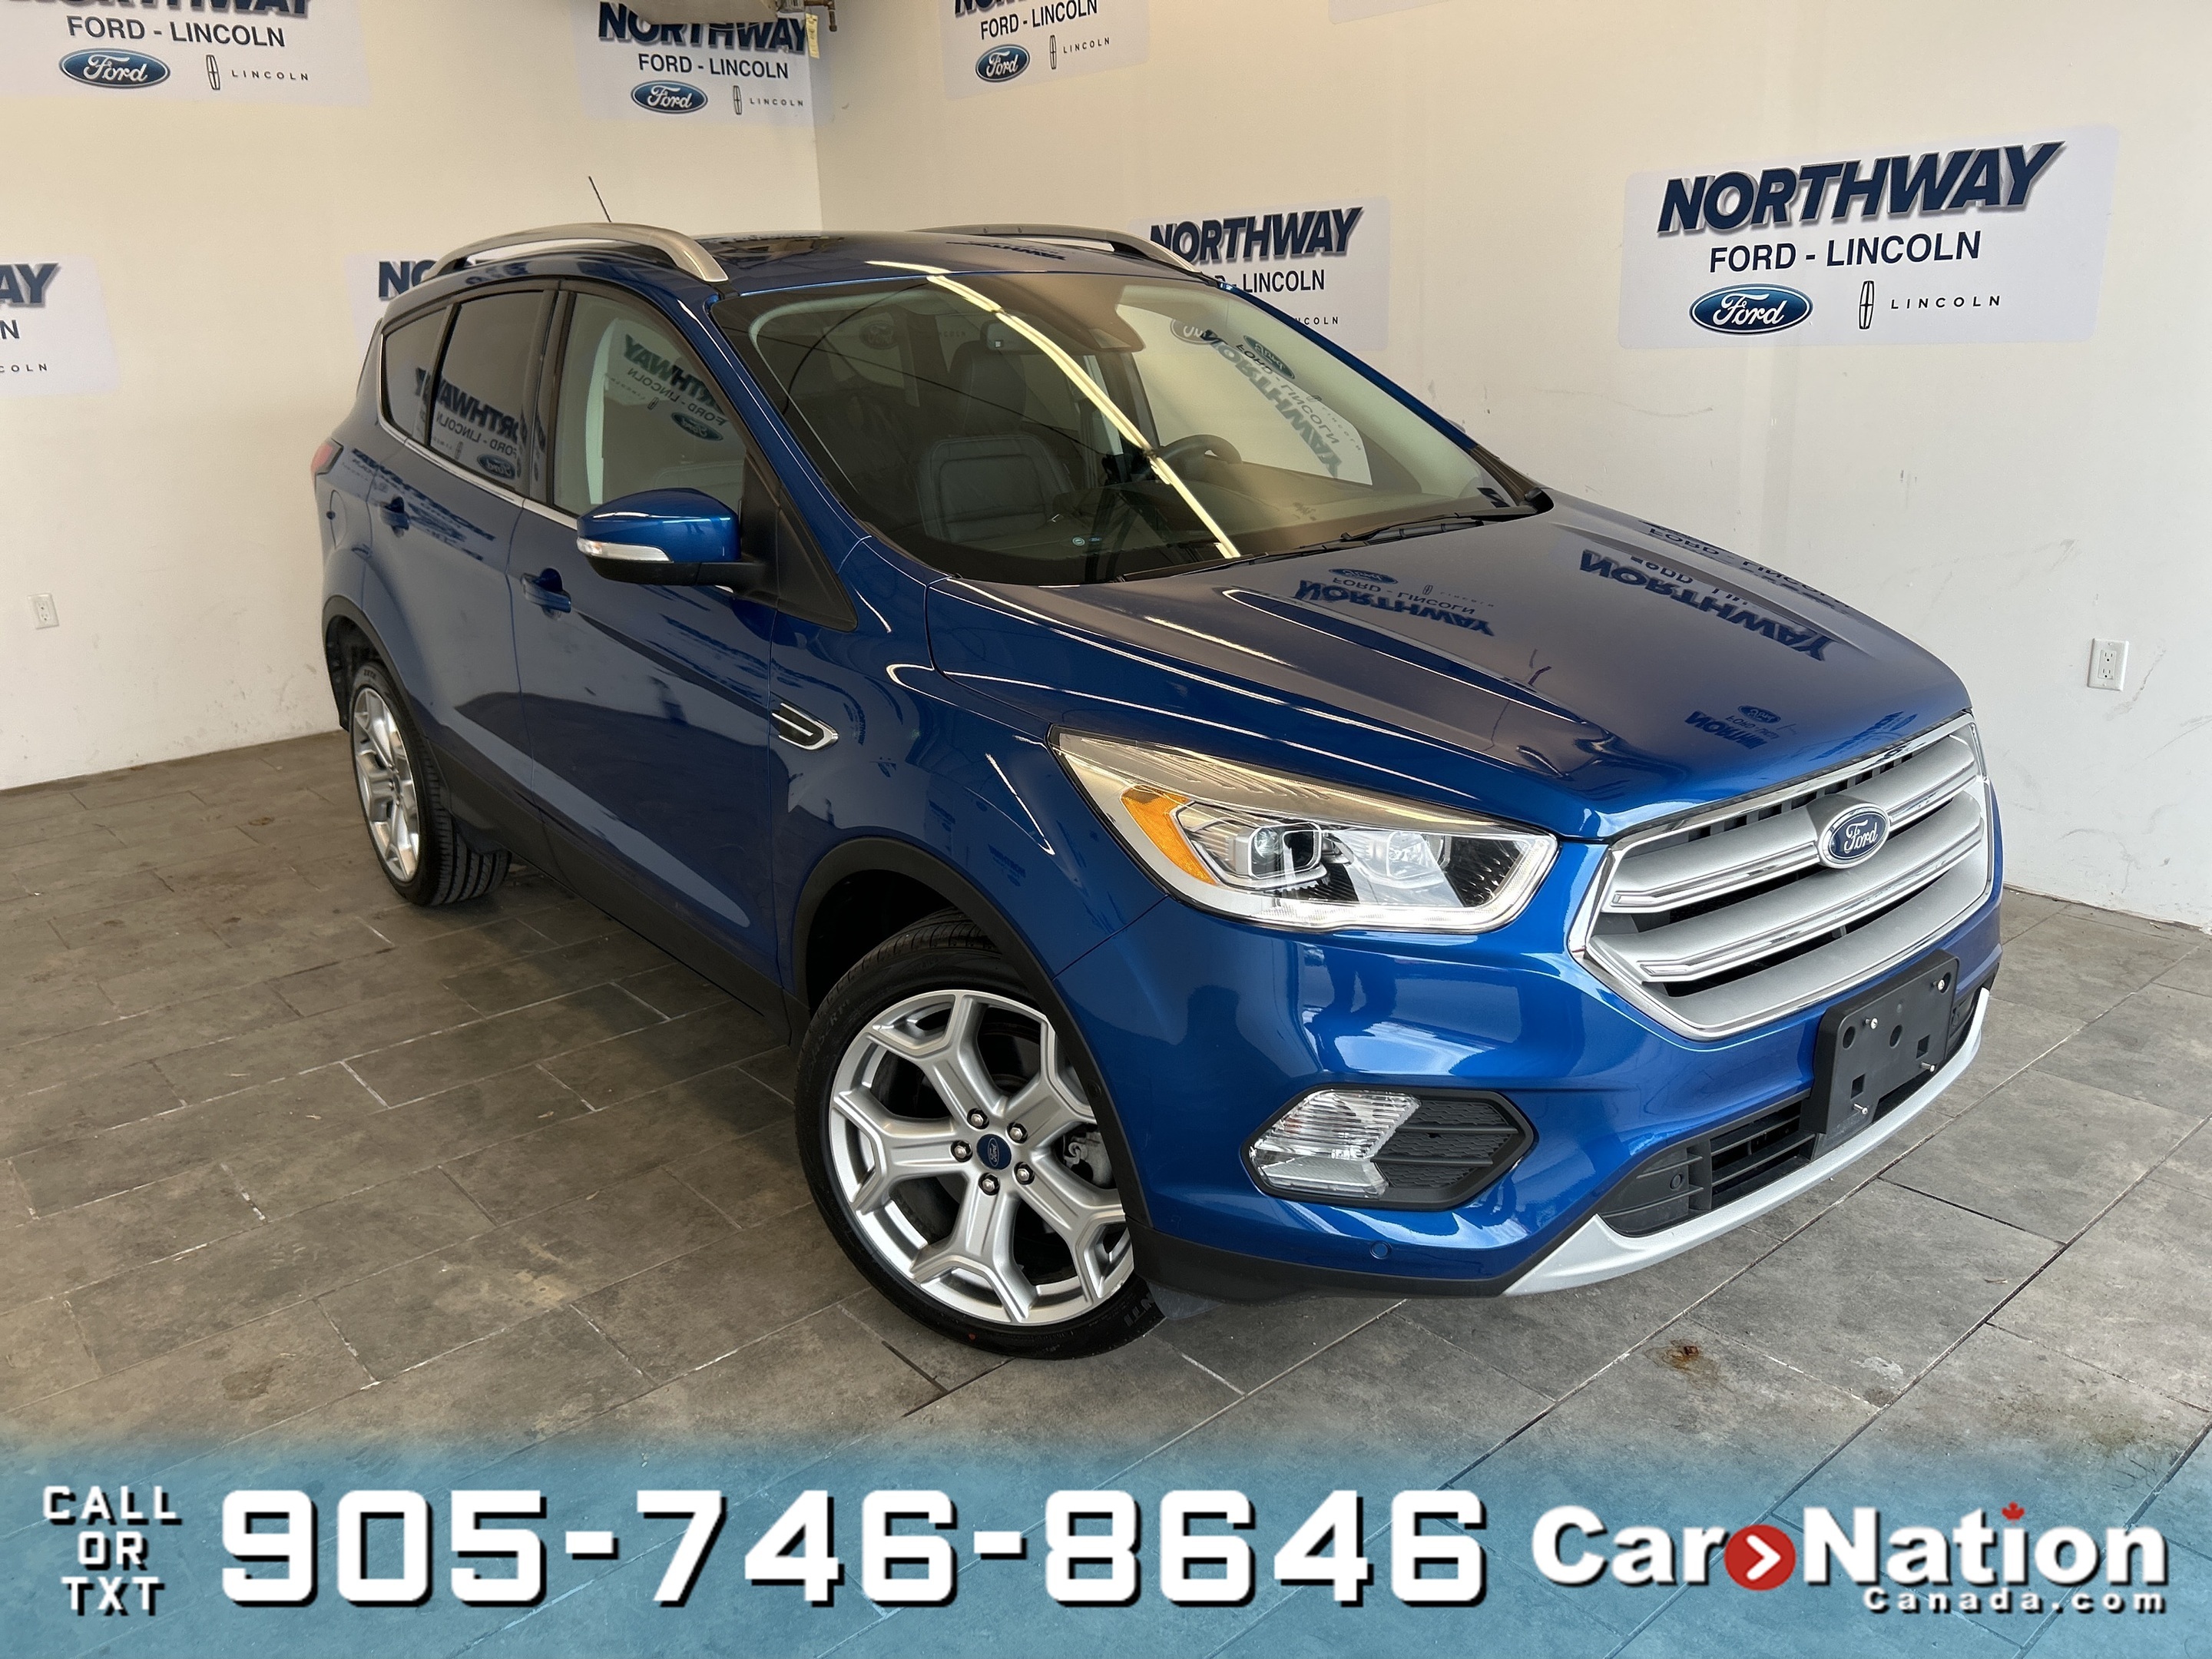 2019 Ford Escape TITANIUM | 4X4 | LEATHER | PANO ROOF | NAV